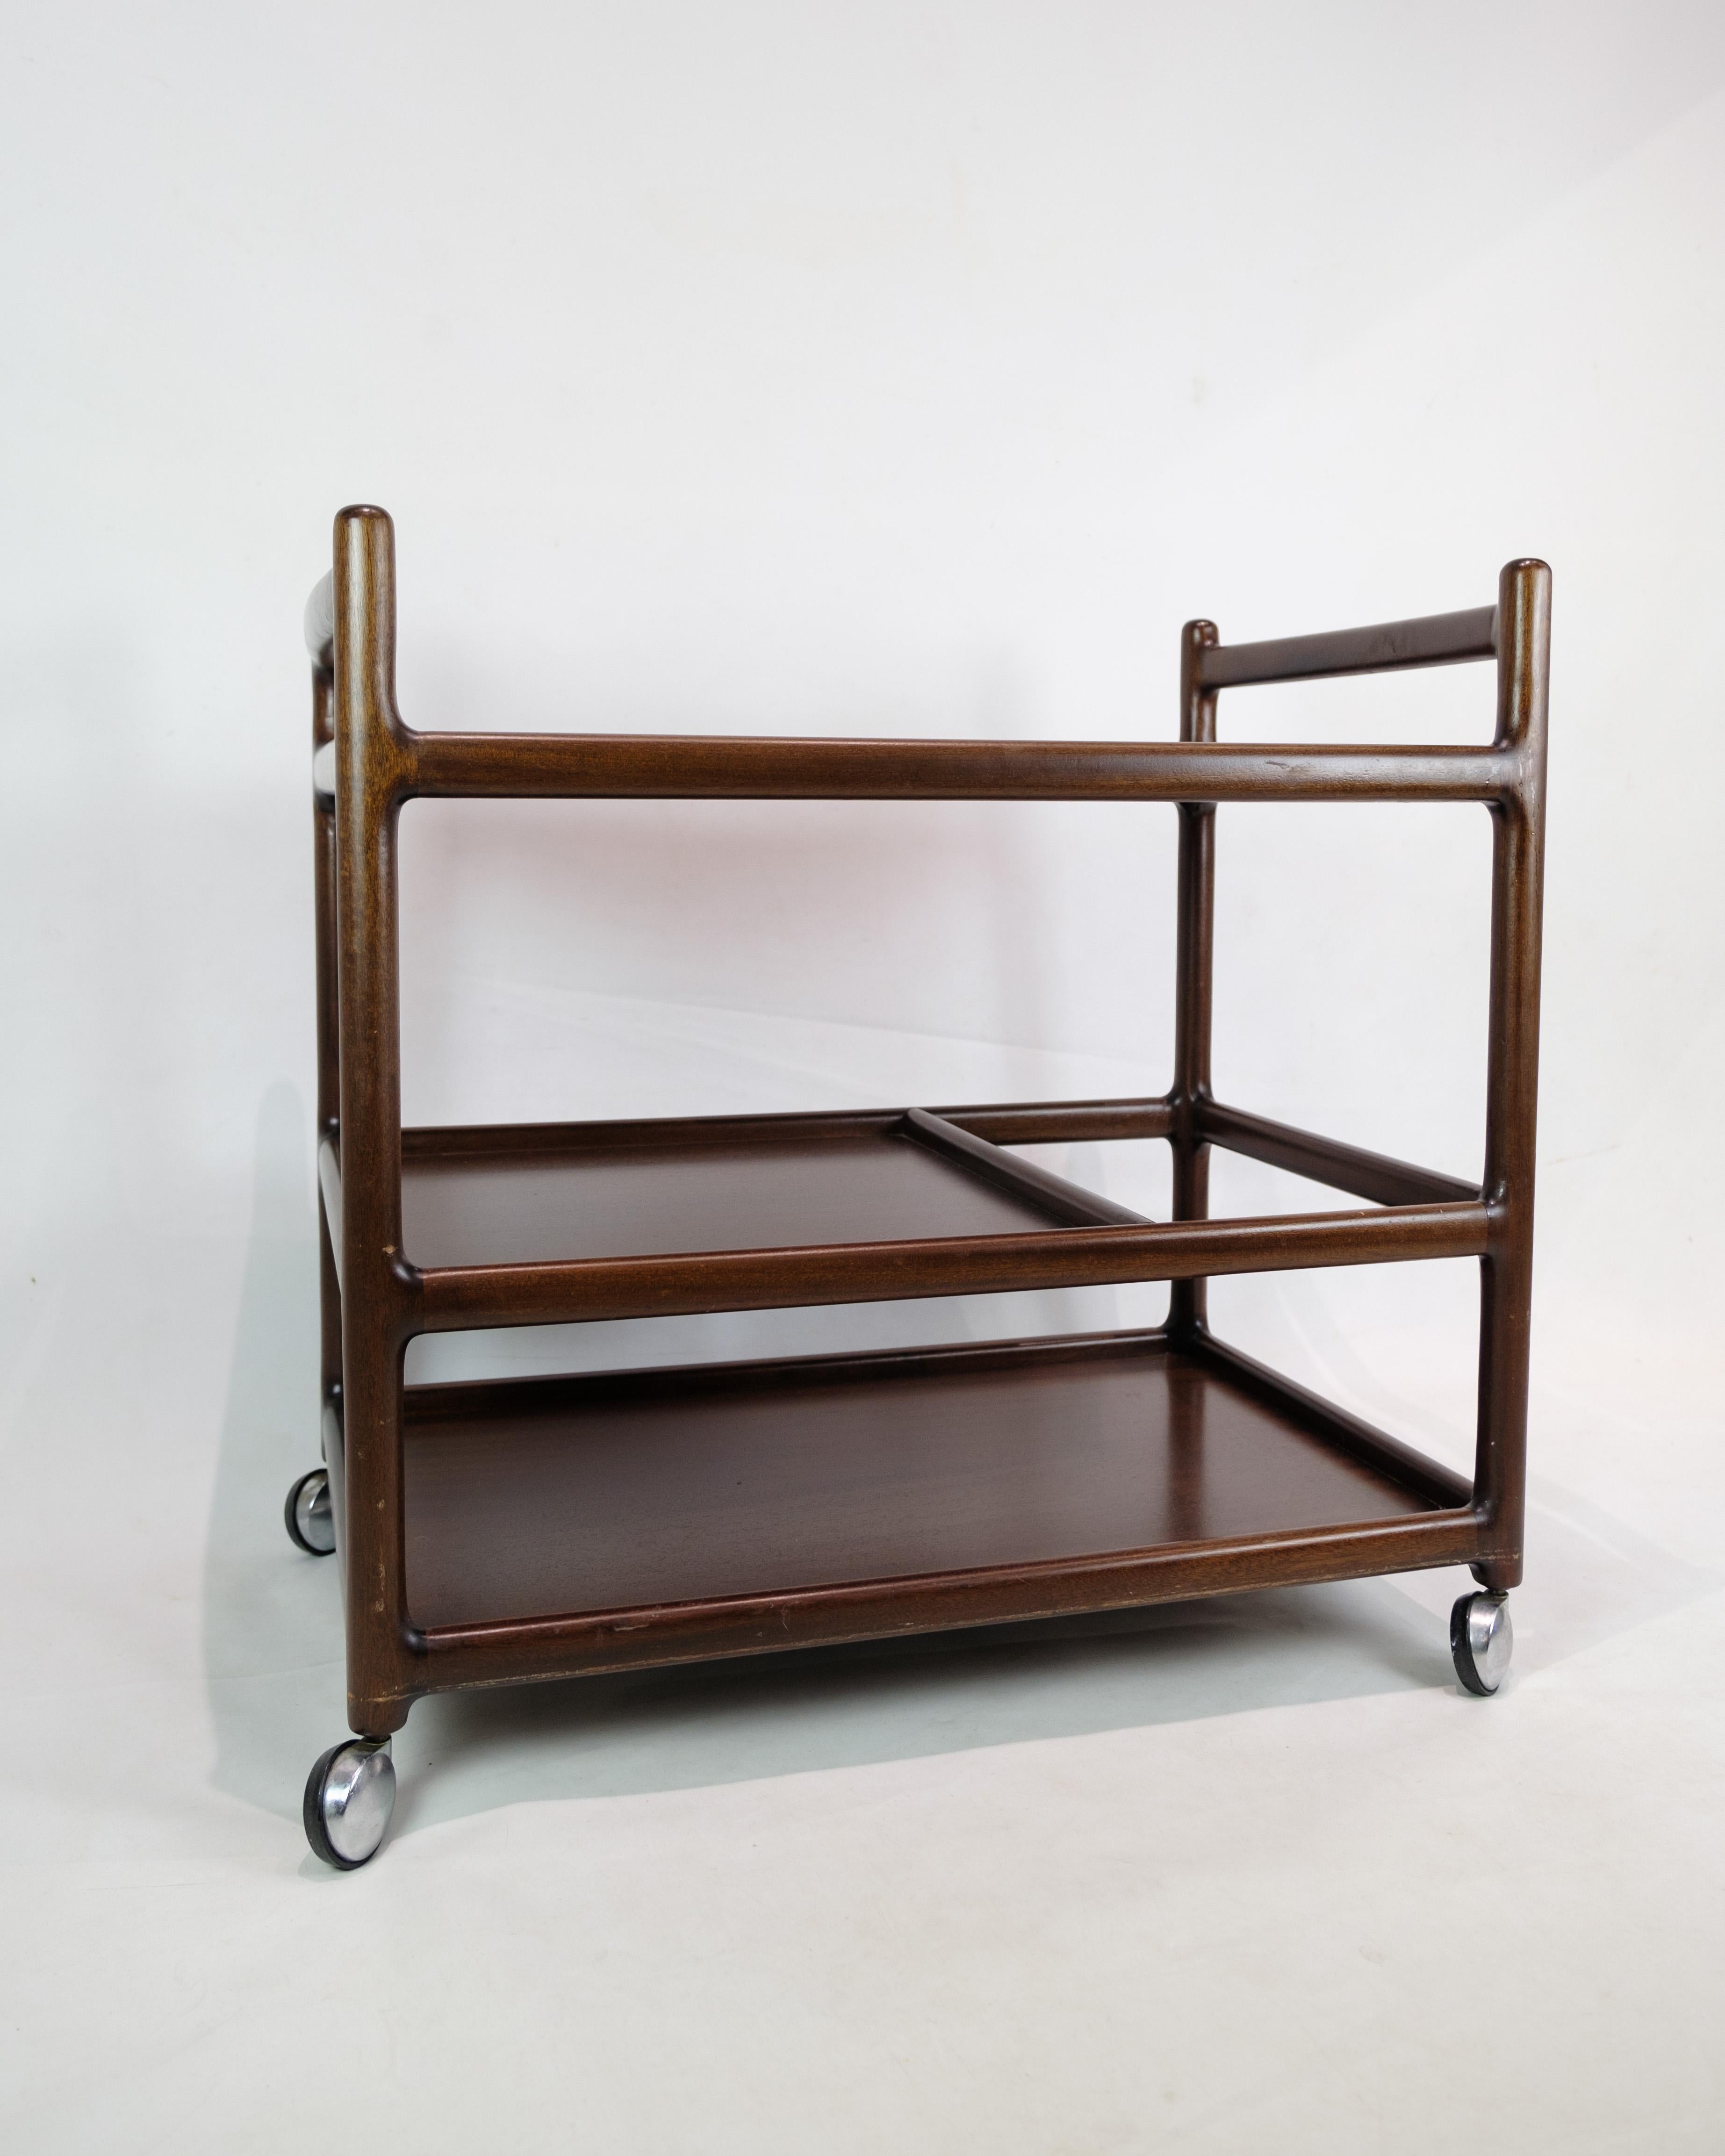 This serving trolley is an enchanting example of Johannes Andersen's design aesthetics from the 1960s and was produced by Silkeborg Møbelfabrik. Made of mahogany wood, the carriage exudes a warm and welcoming atmosphere, typical of this era of